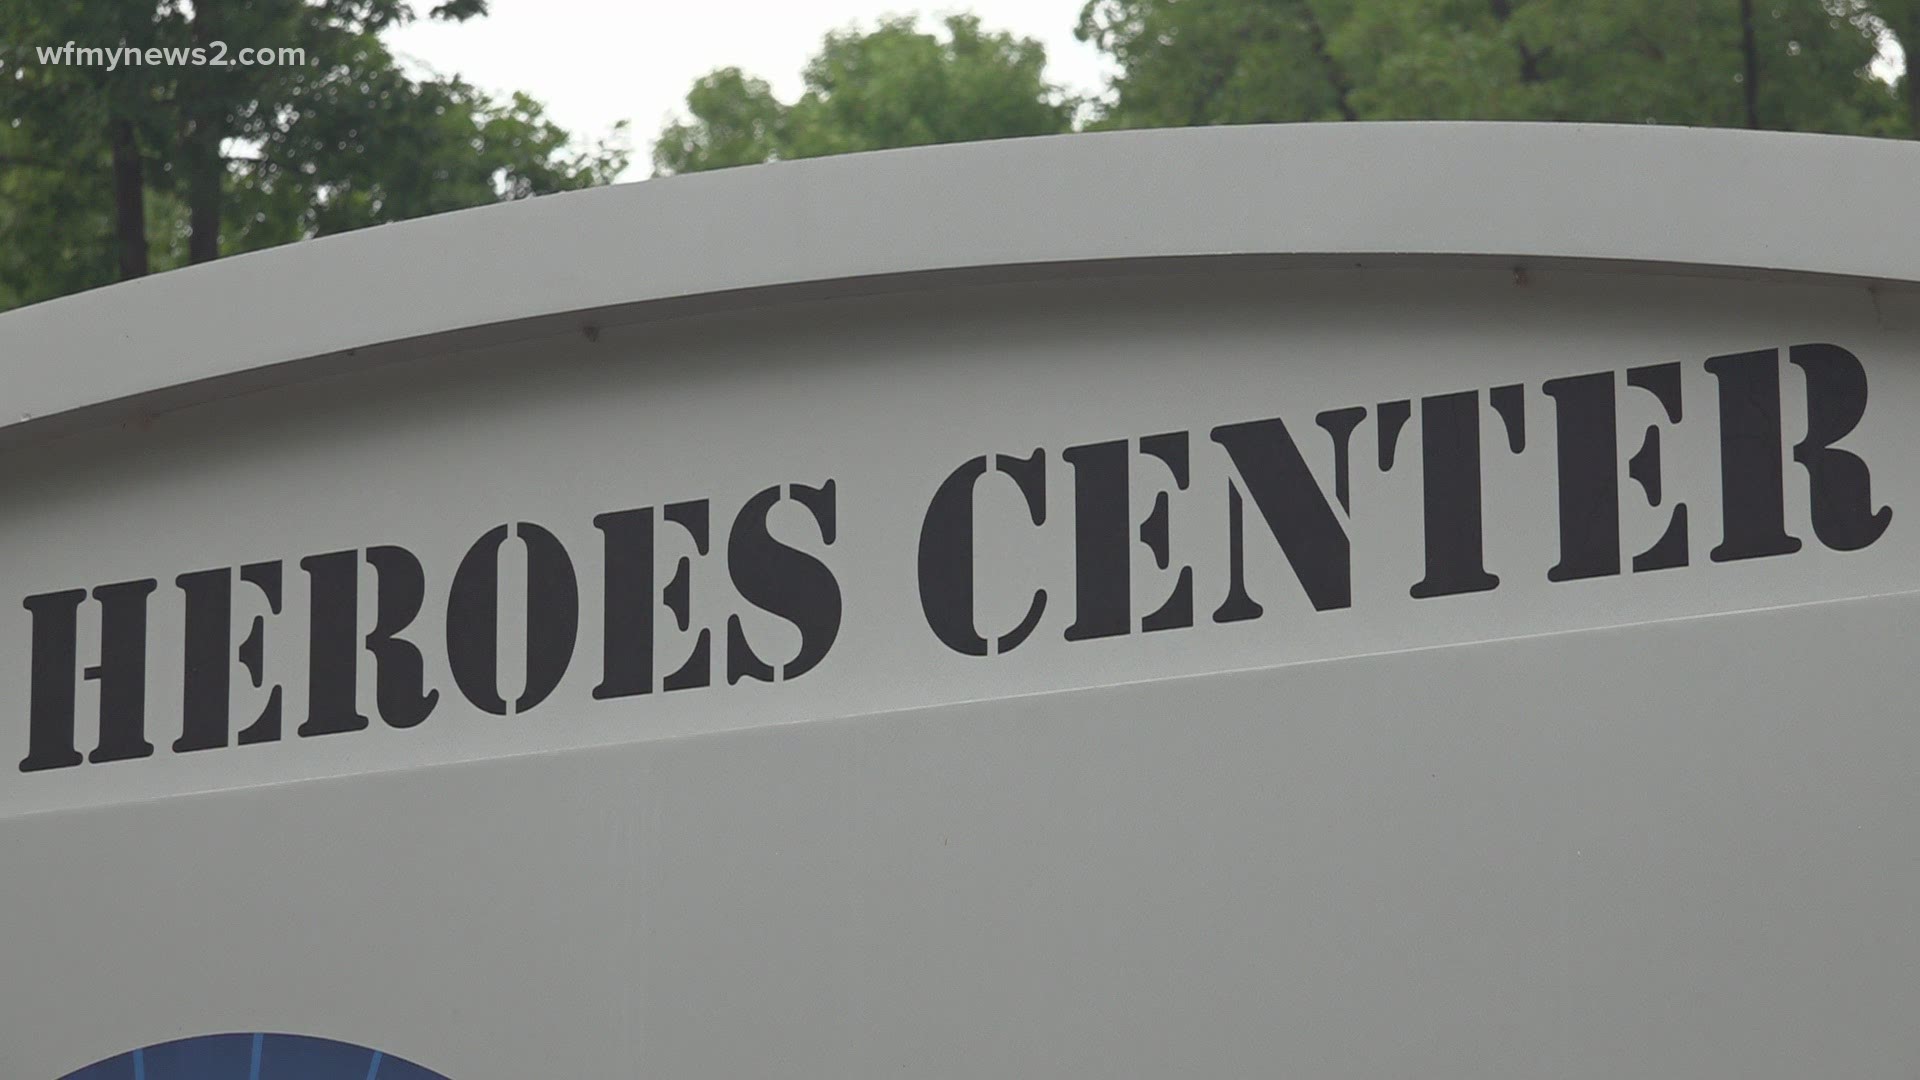 The Heroes Center in High Point is hosting a community event, supporting those who have served our country.